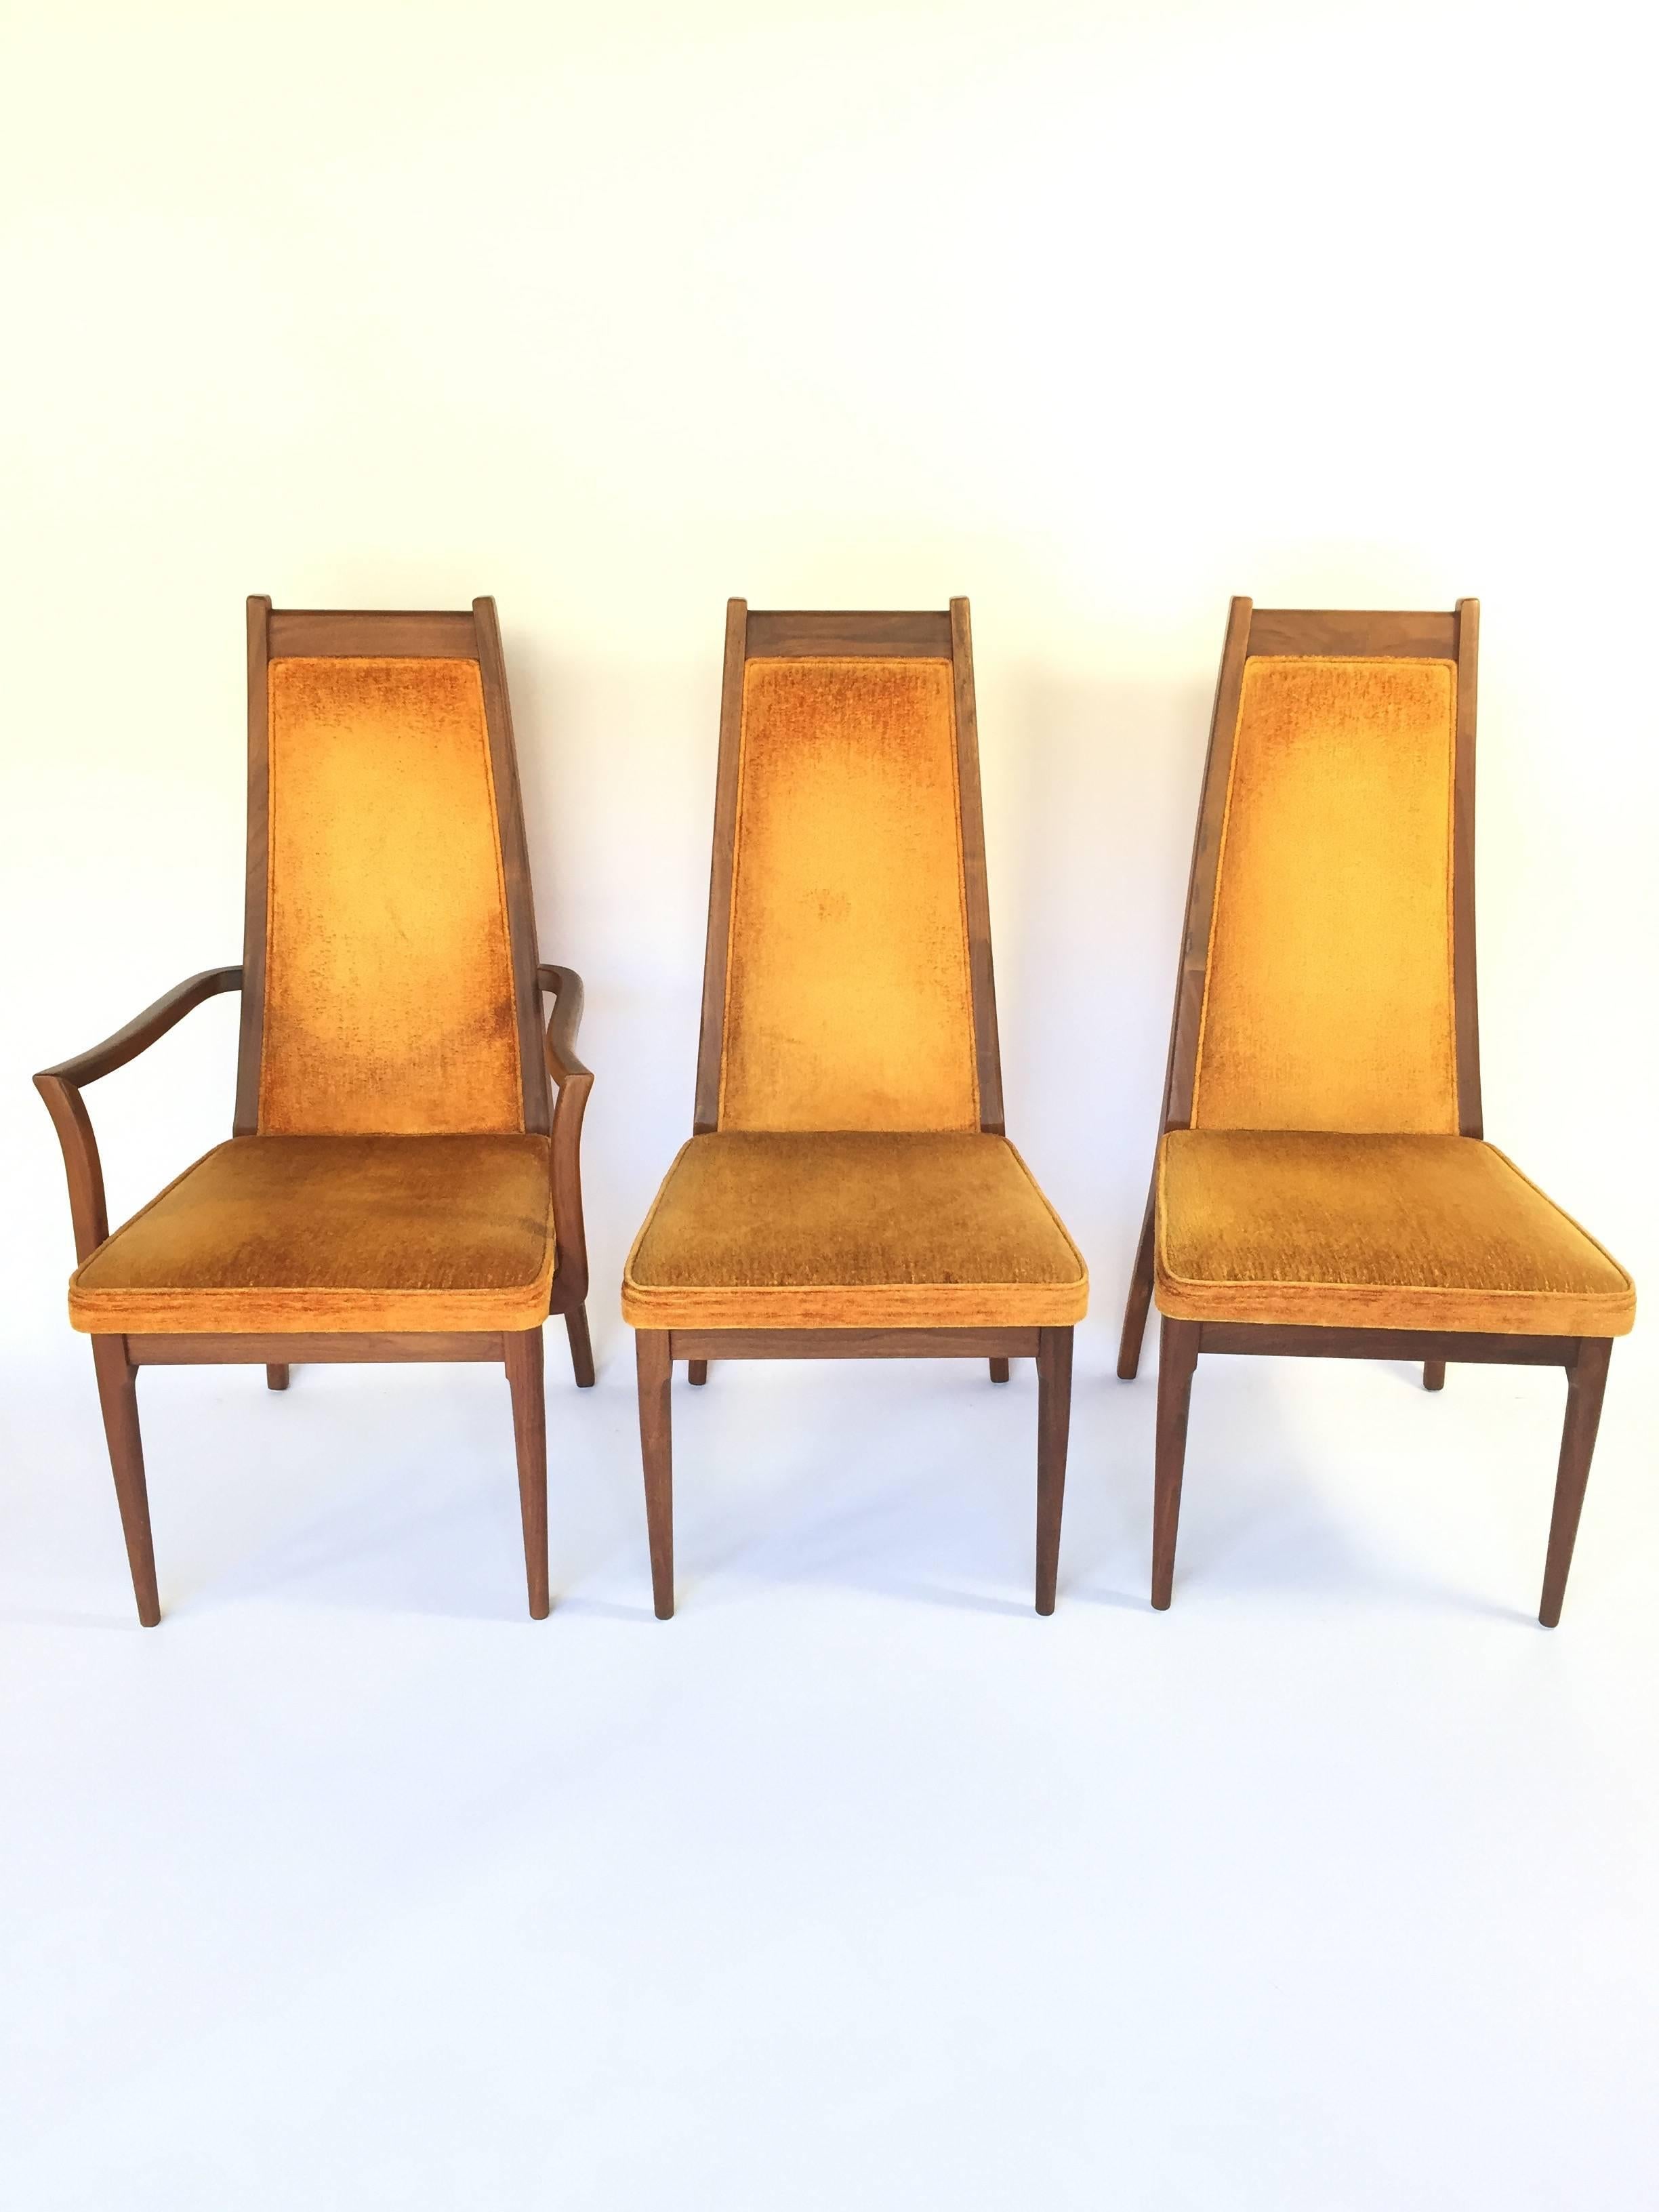 Gorgeous Mid-Century Modern walnut dining chairs with orange upholstery. High back form factor makes these chairs very comfortable, while the organic curves of the legs and arms scream Mid-Century chic. In pristine condition. Includes two armchairs